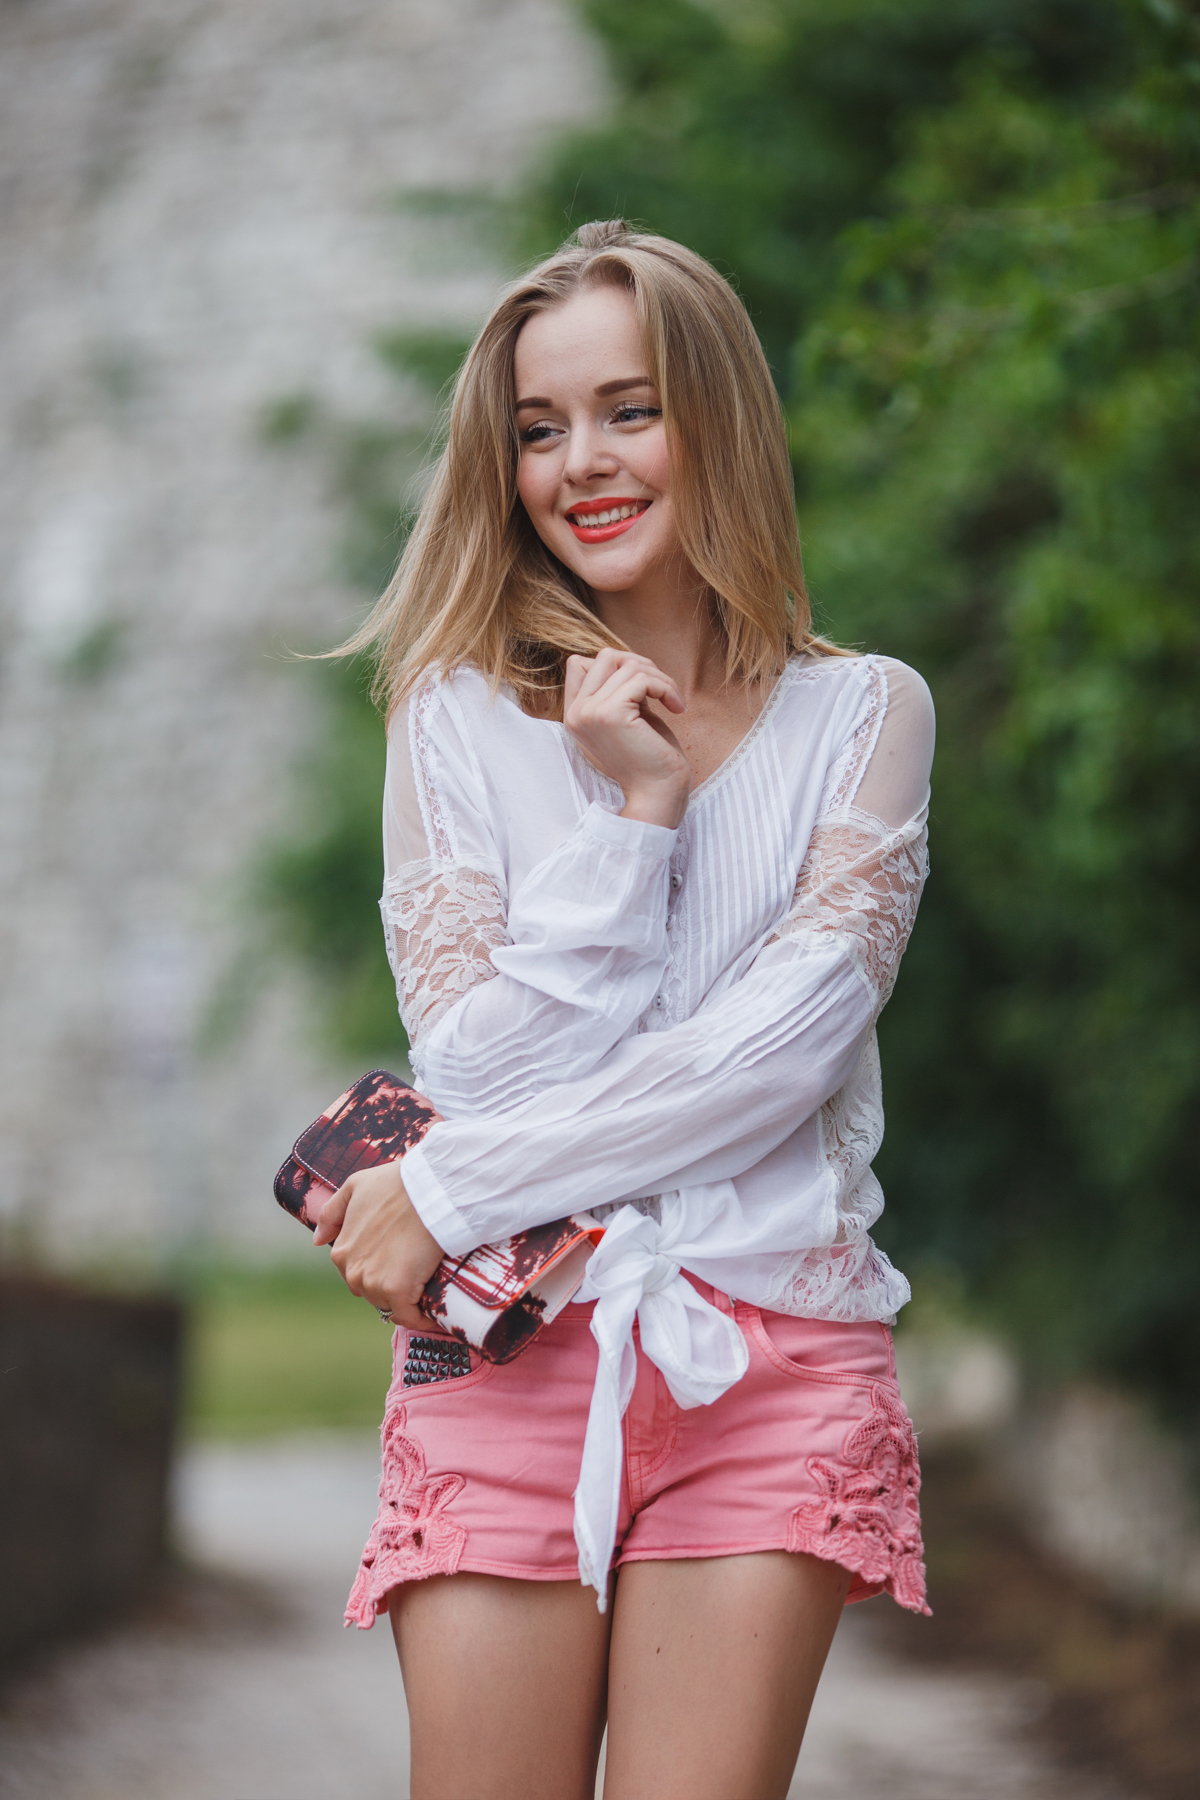 darya kamalova thecablook fashion lifestyle russian italian blogger wears total guess myguess outfit in castello di brescia -26